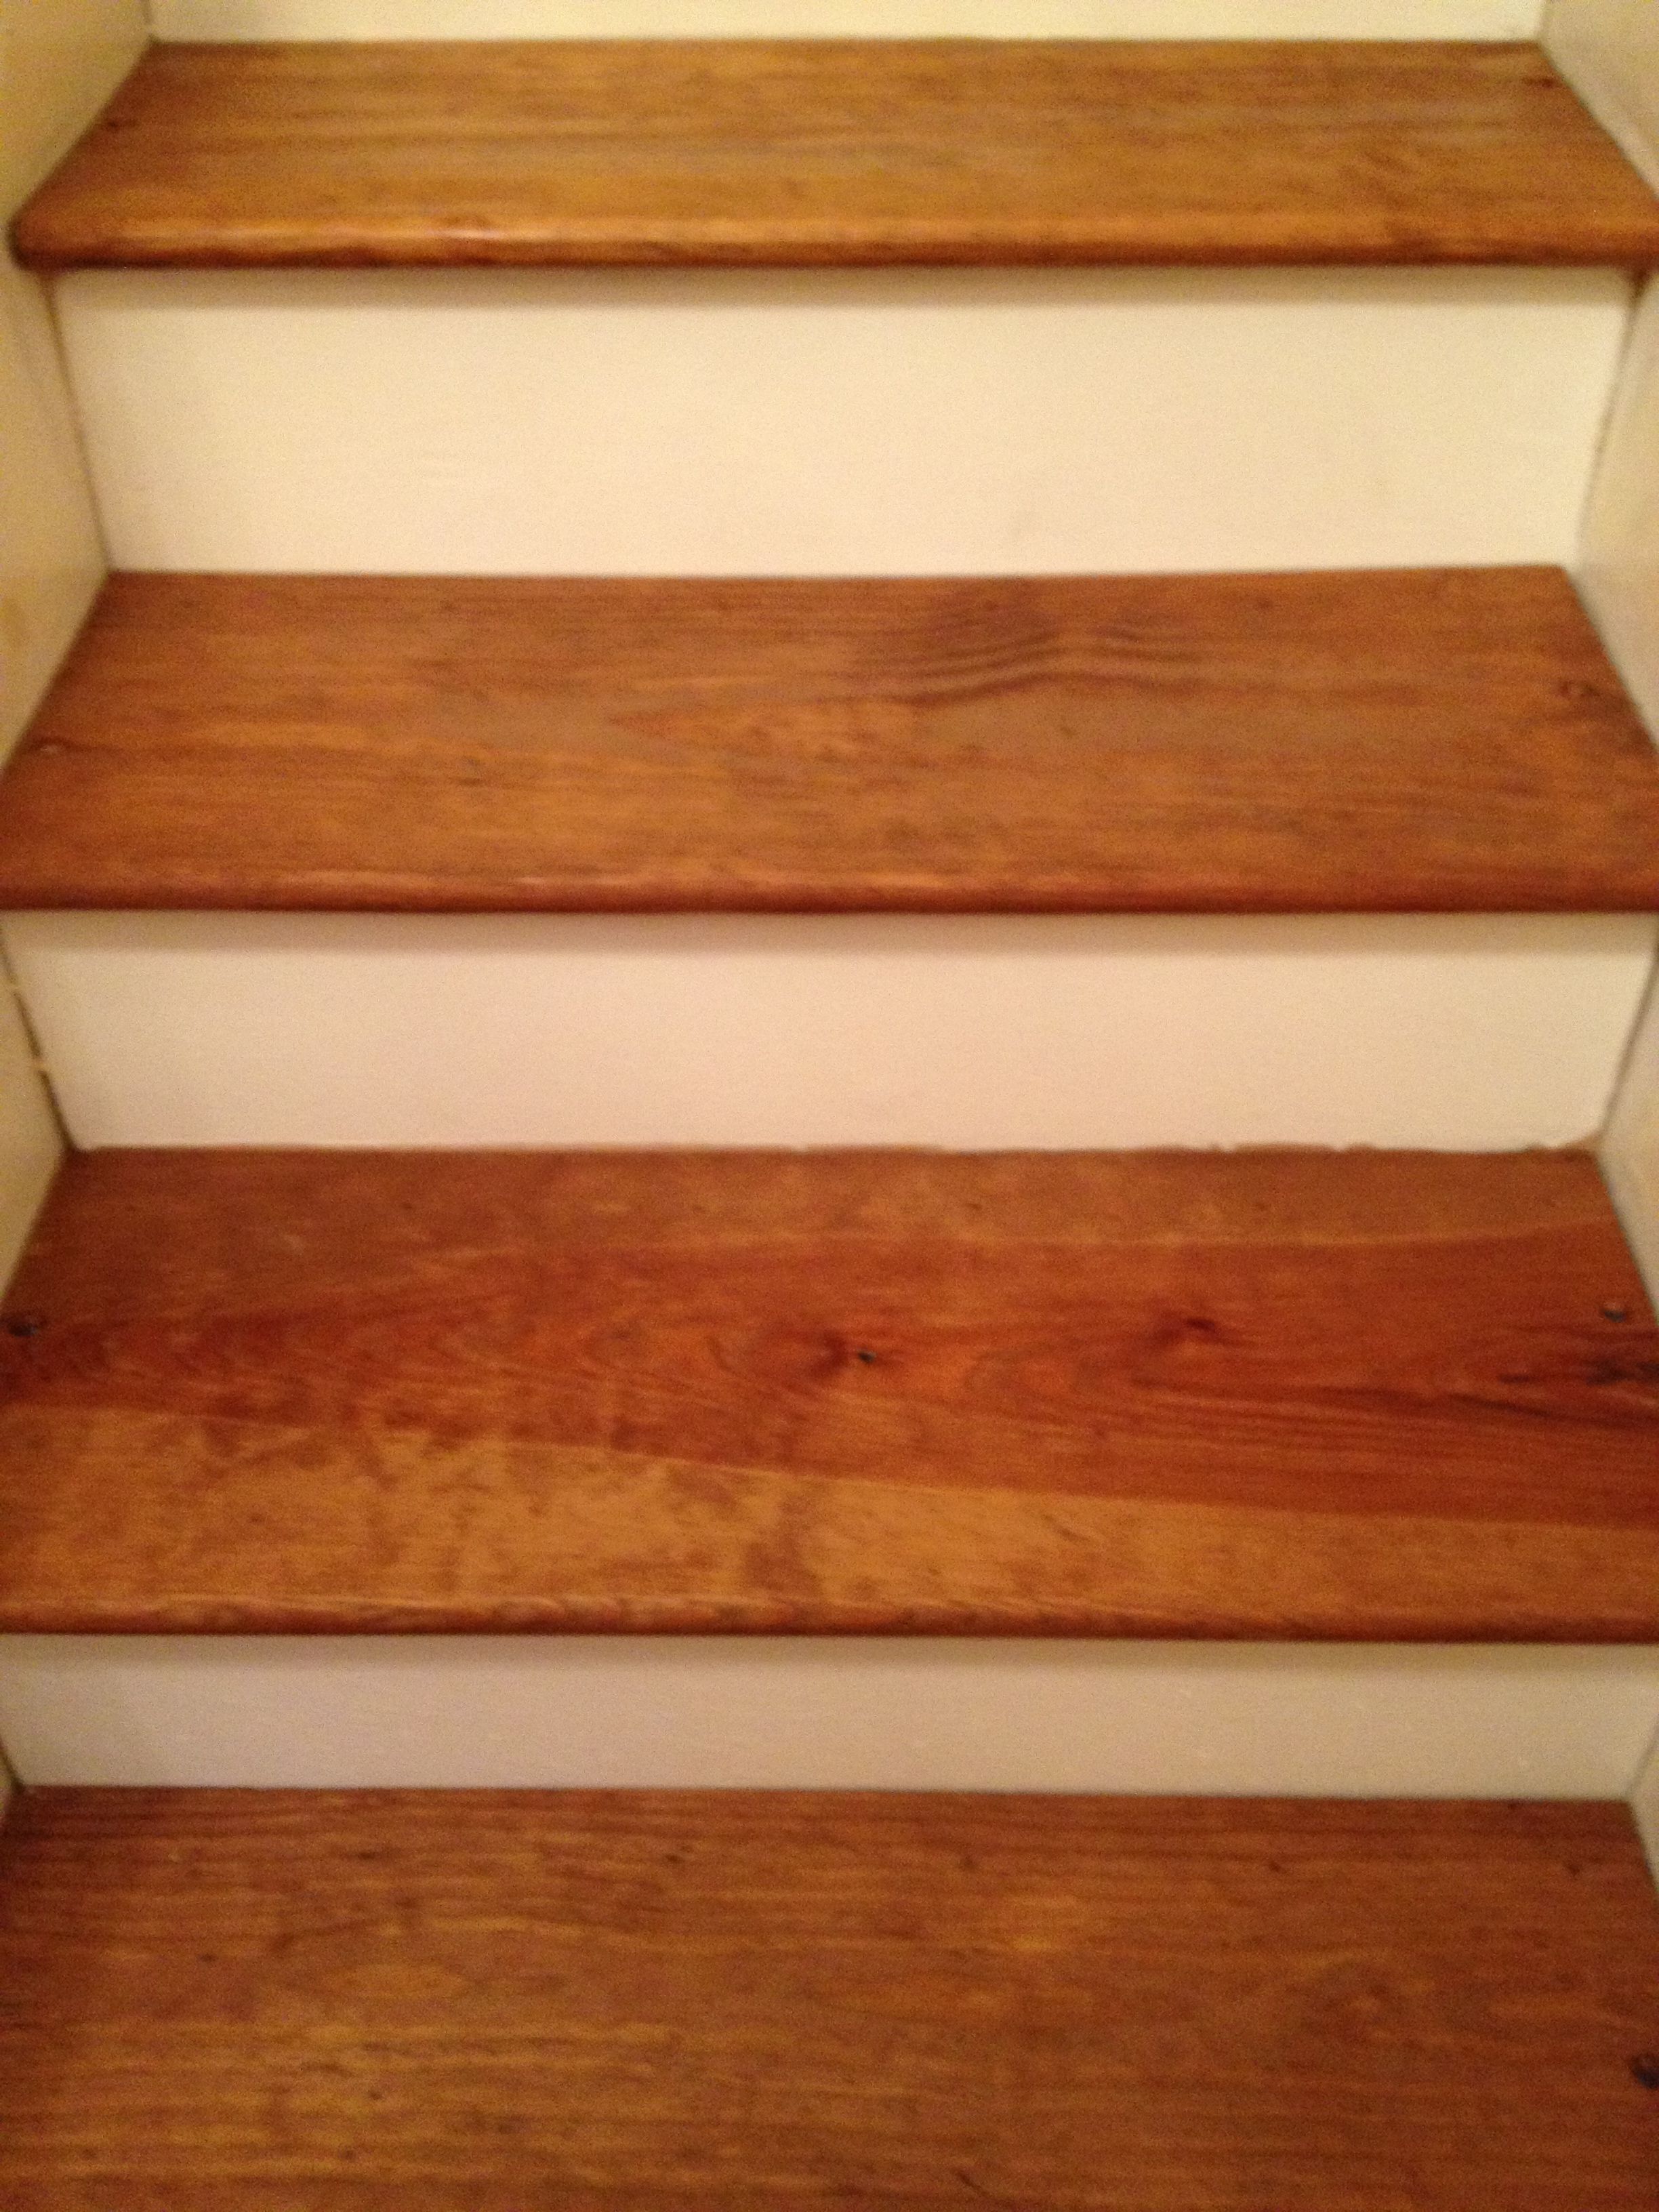 Diy Pine Stair Treads Remodel Diy Projects Pinterest Stair With Regard To Floor Treads (View 13 of 15)